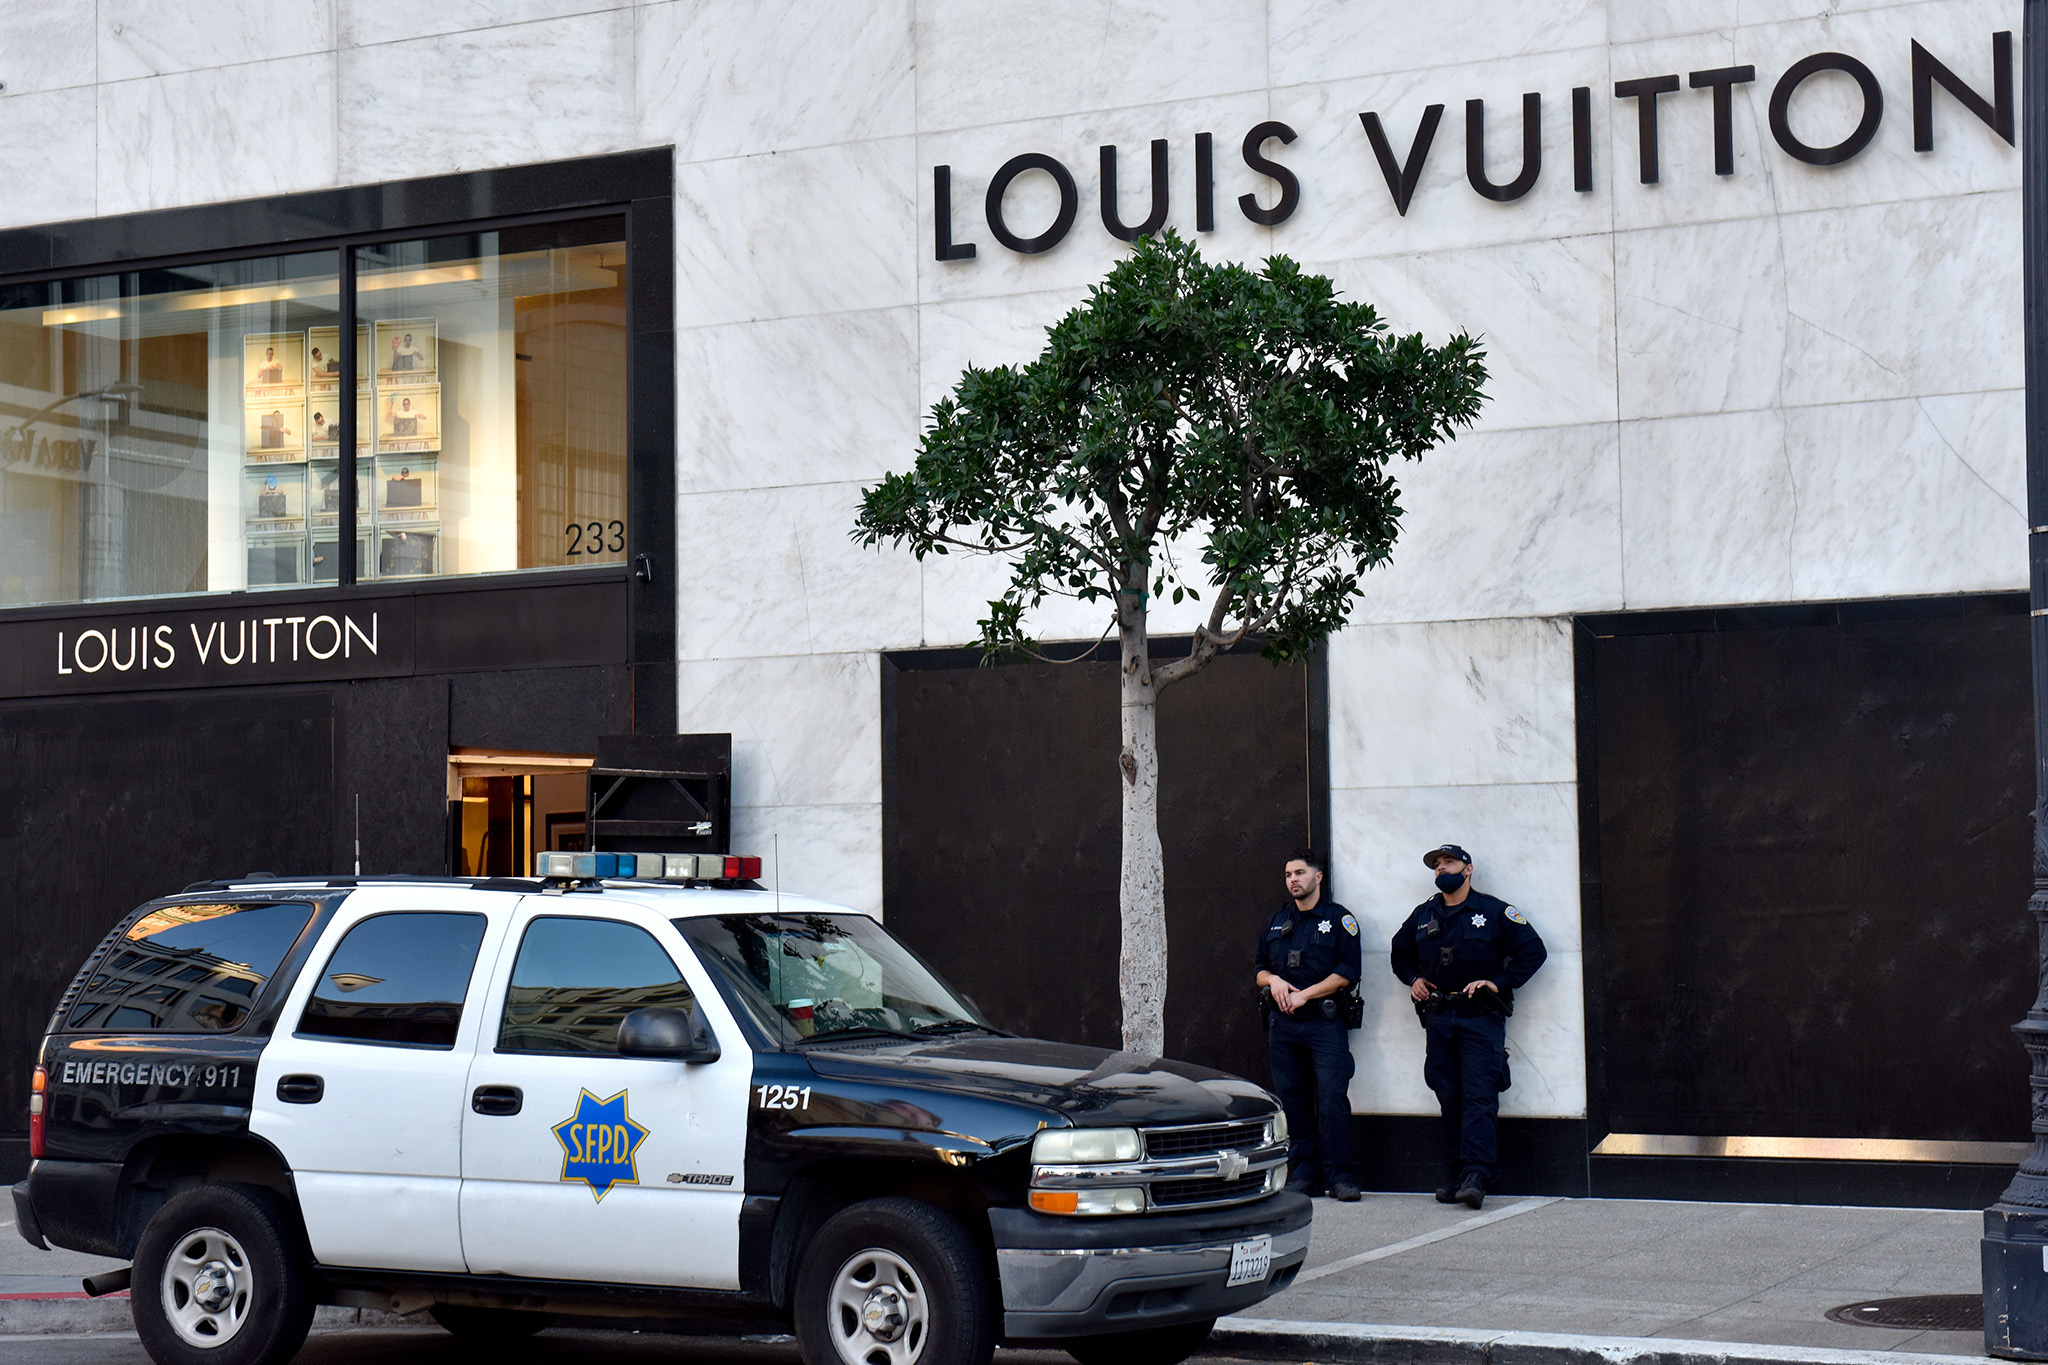 A creative lie lands thieves thousands of dollars in Louis Vuitton  merchandise from San Francisco store  ABC7 San Francisco